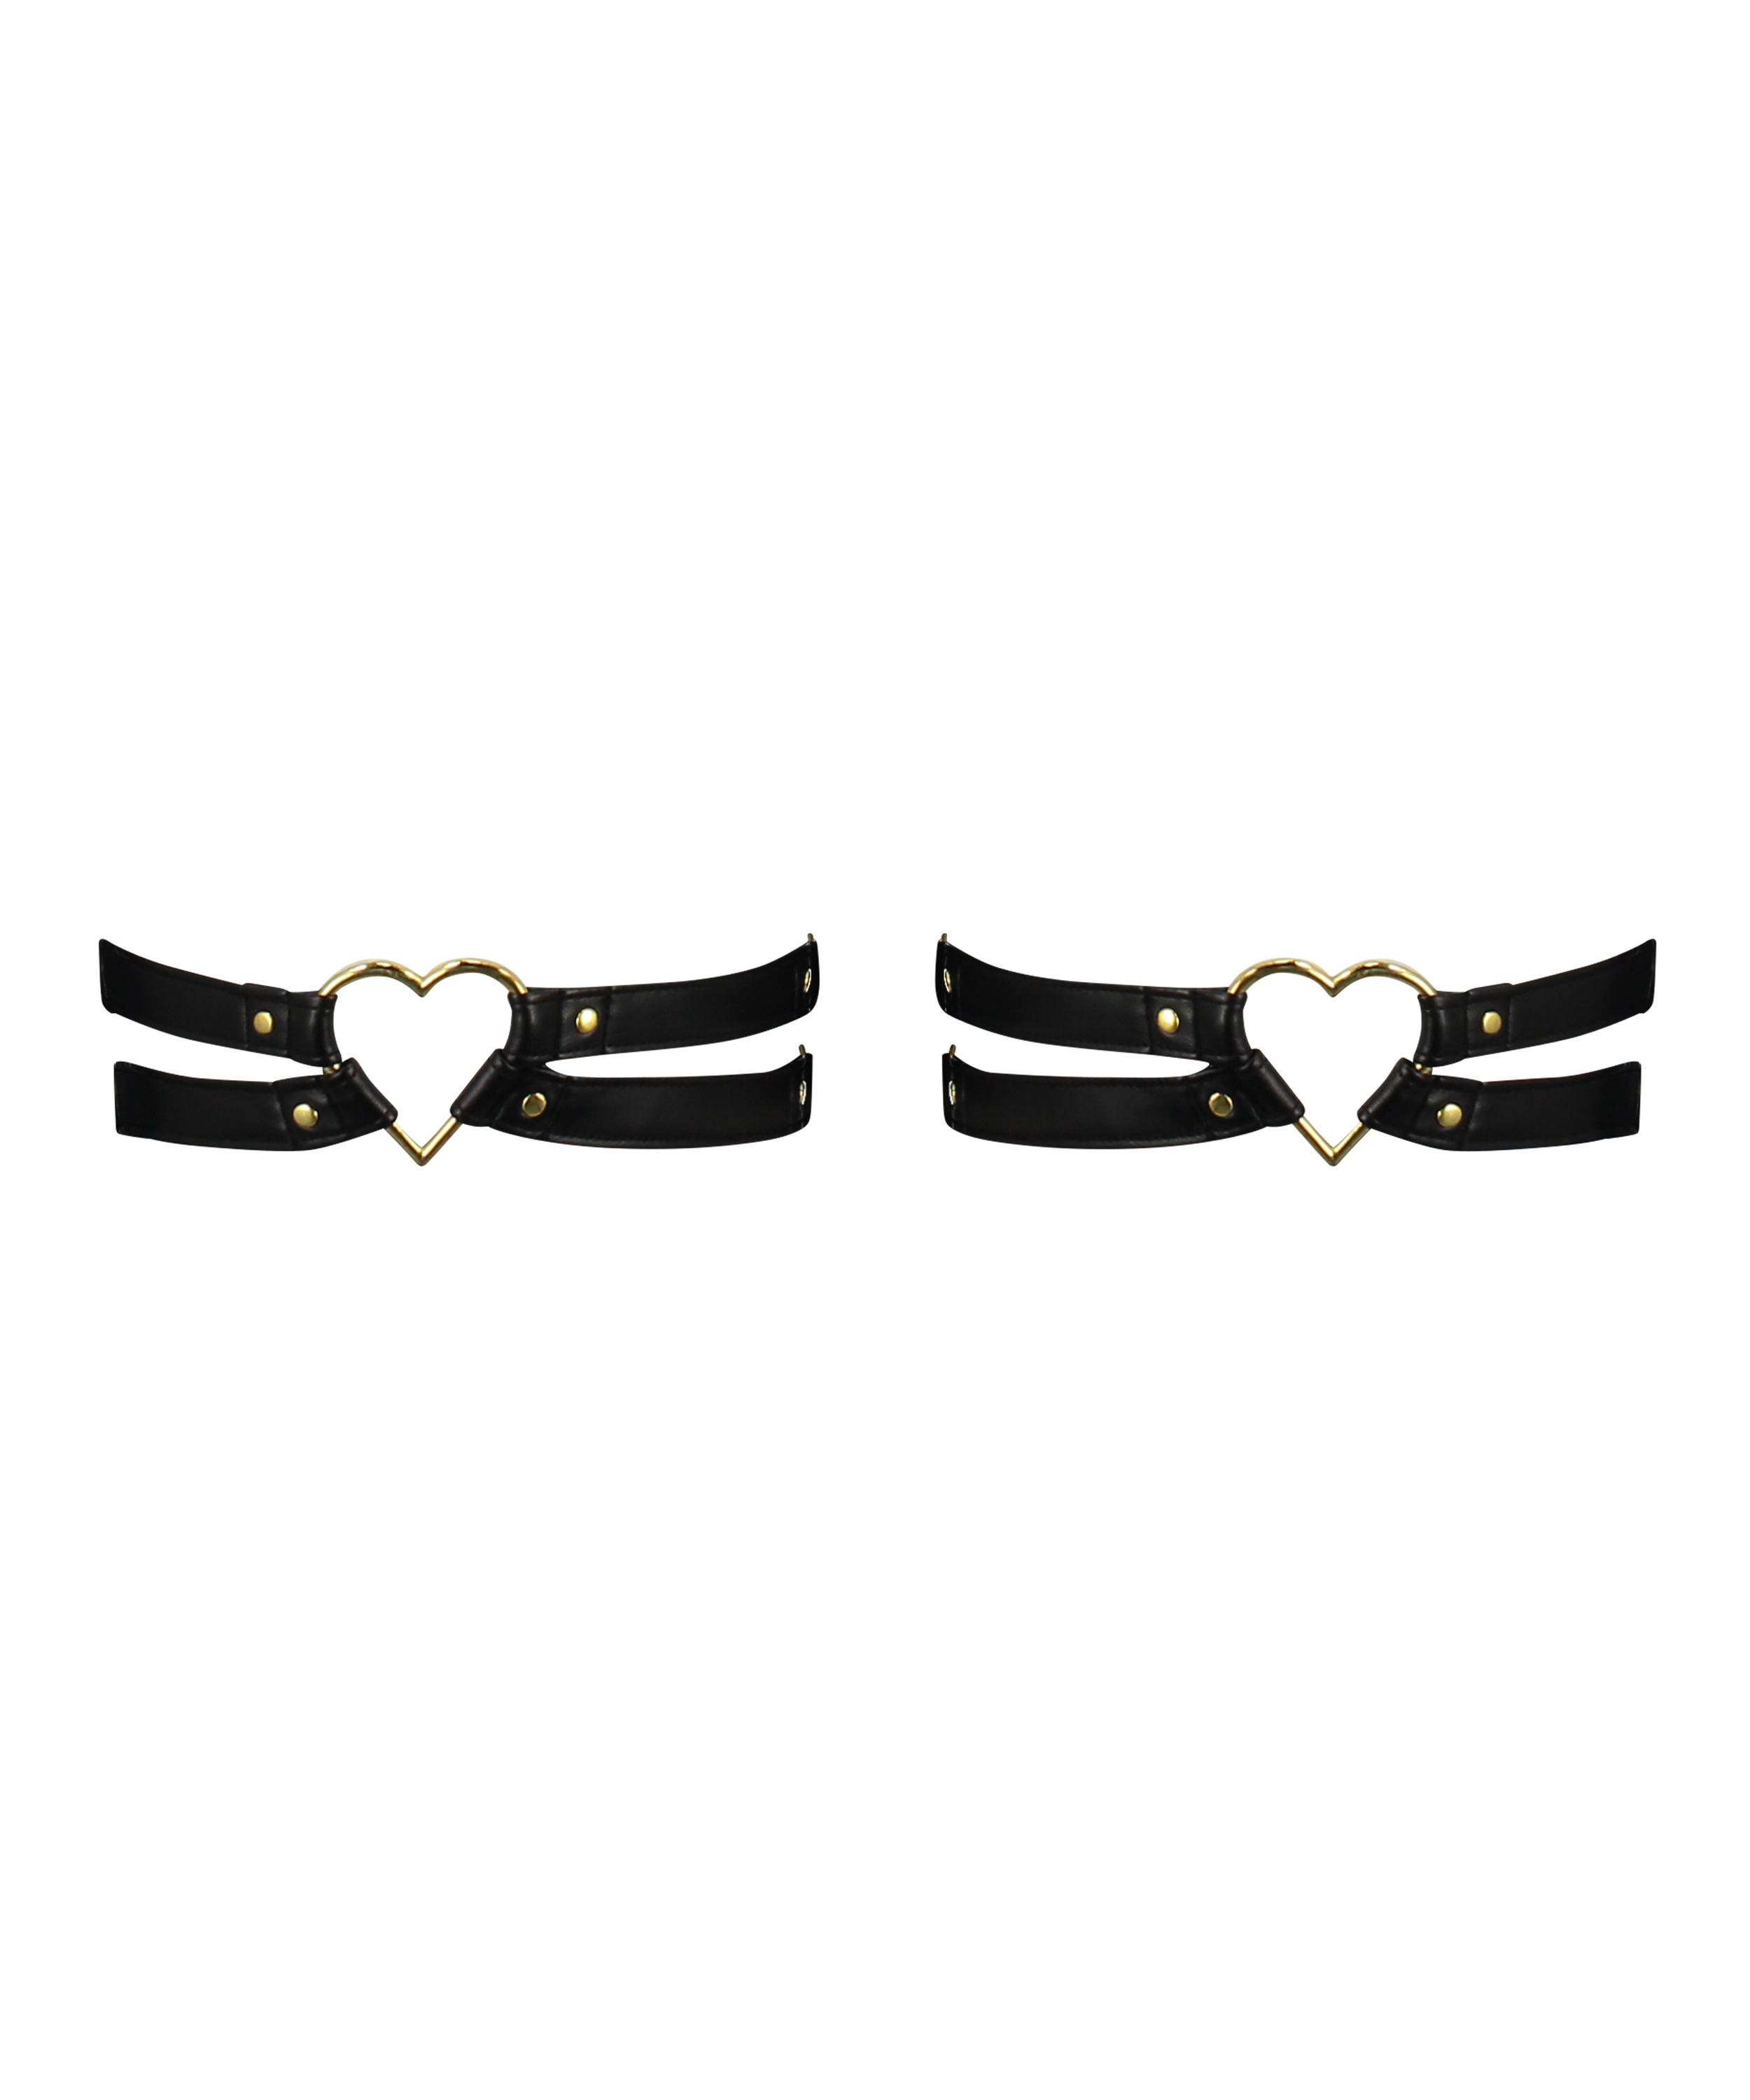 Private Heart Hold Up Suspenders, Black, main